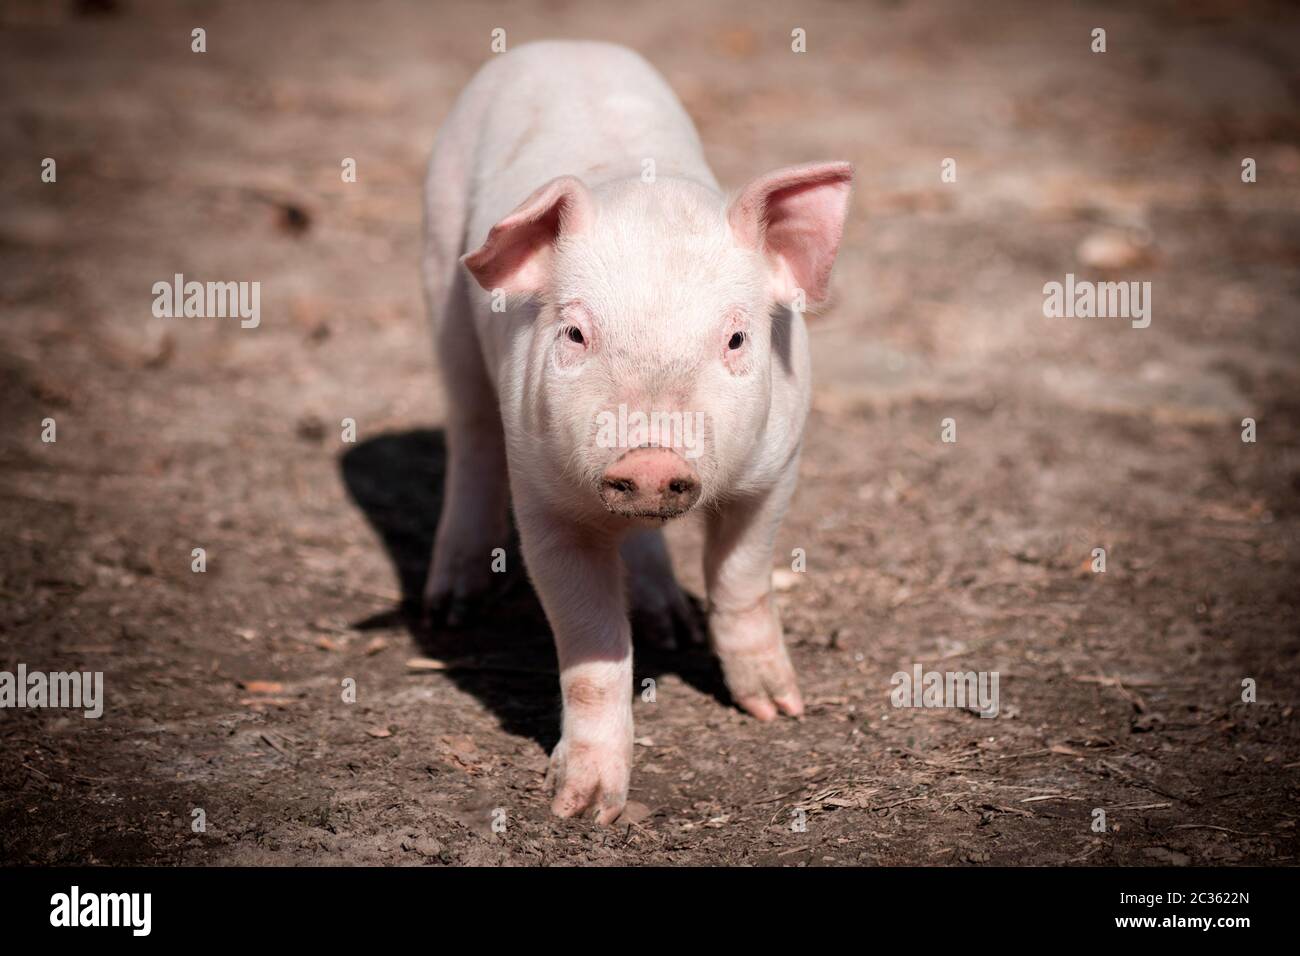 The little pig is looking at camera, pig breeding concept. Stock Photo